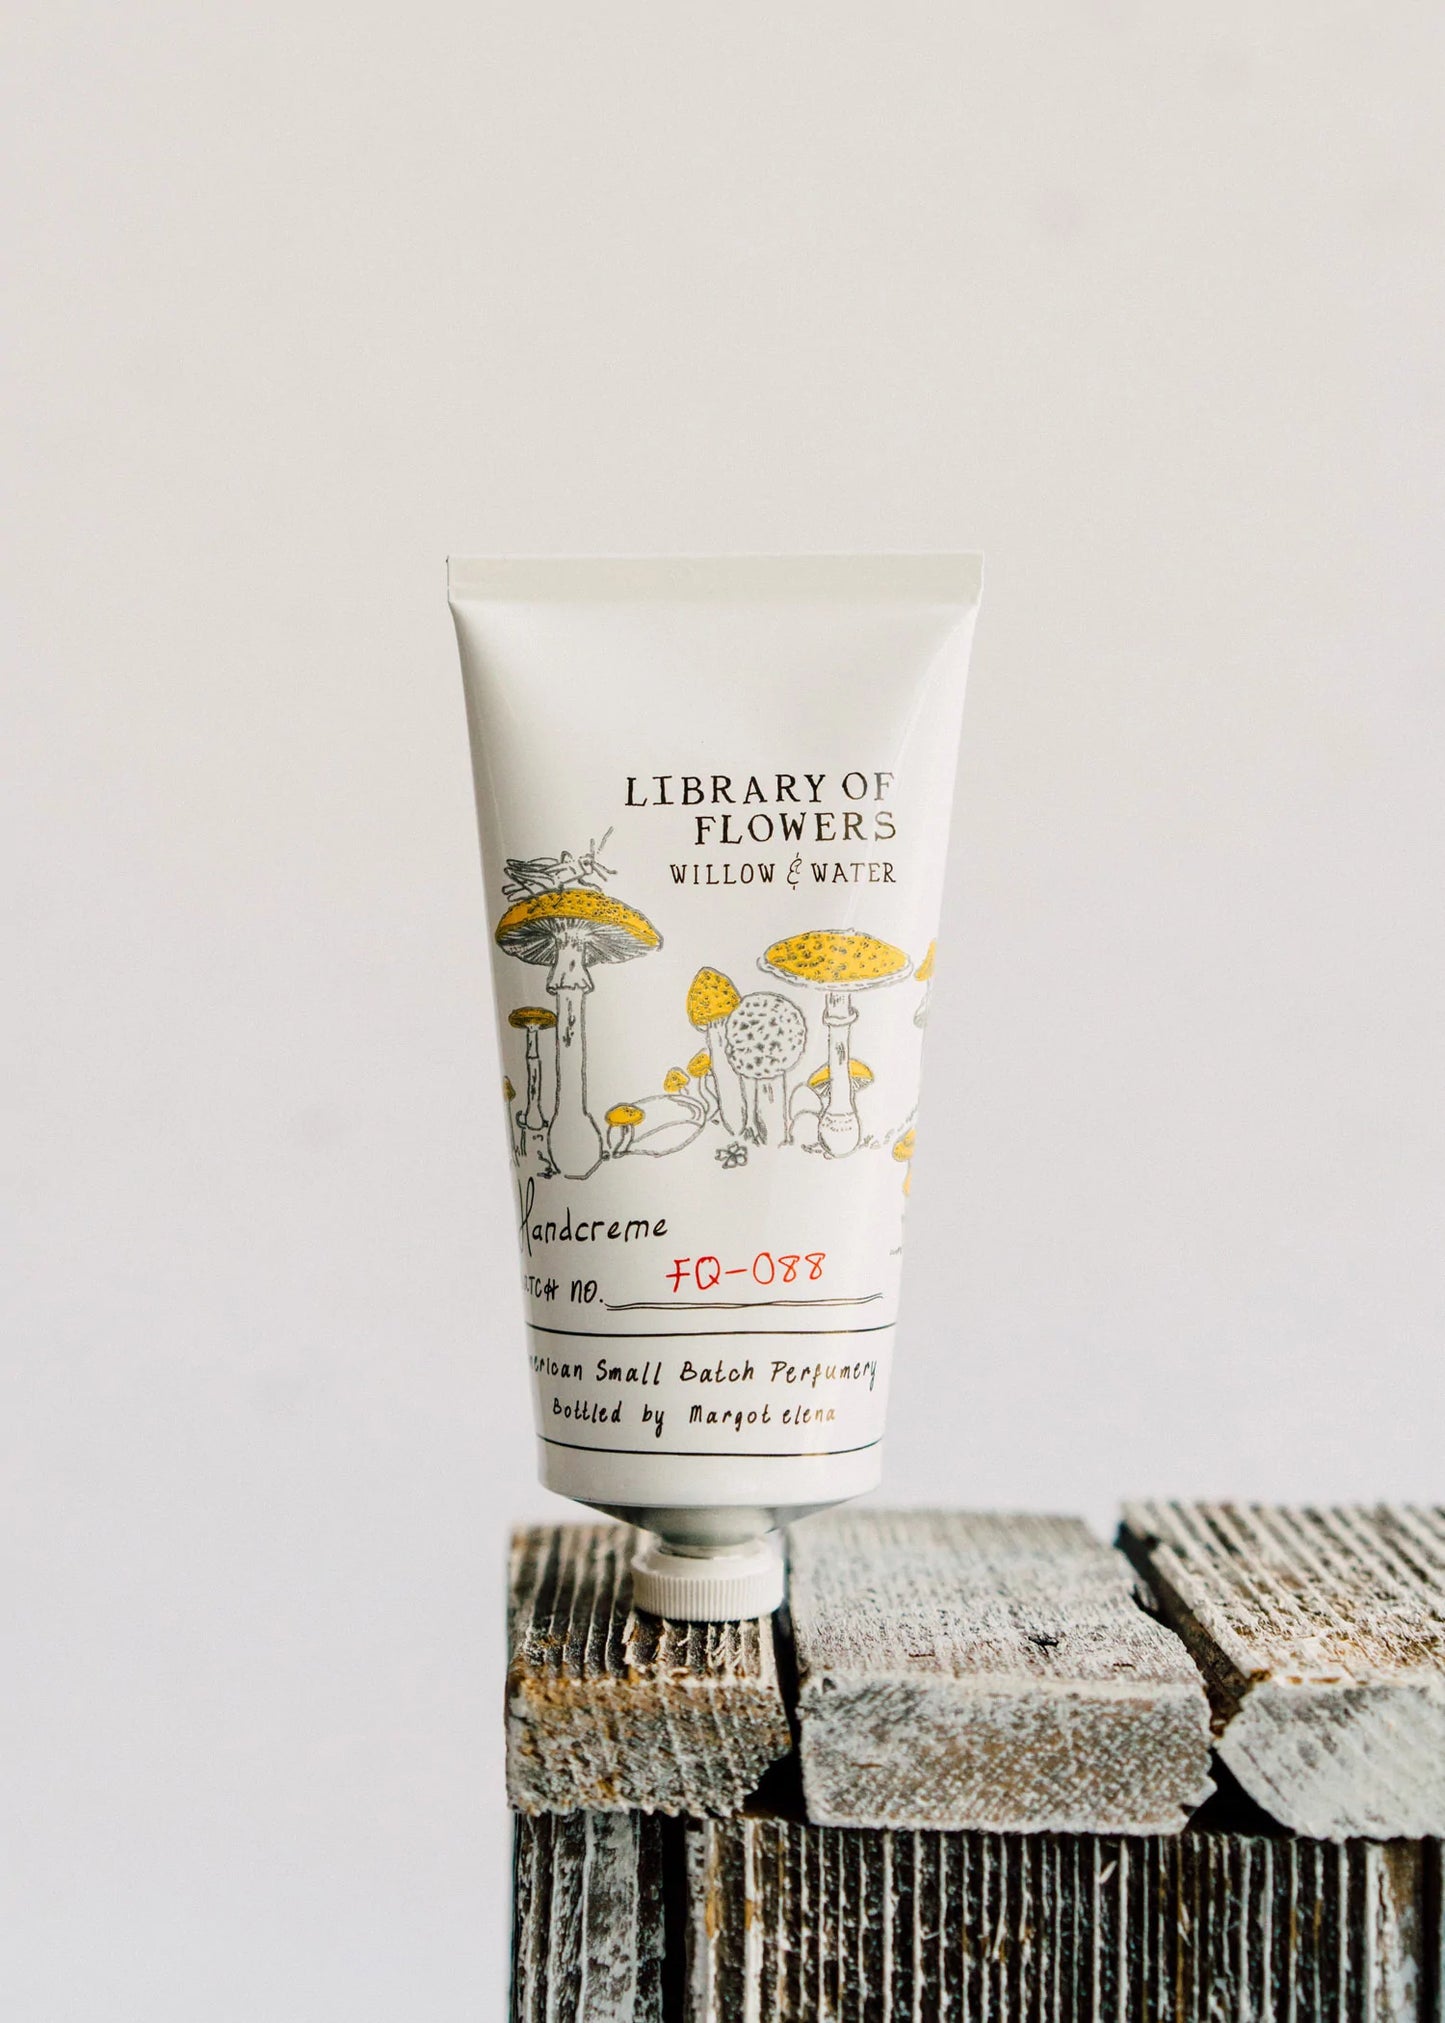 Willow & Water Handcreme